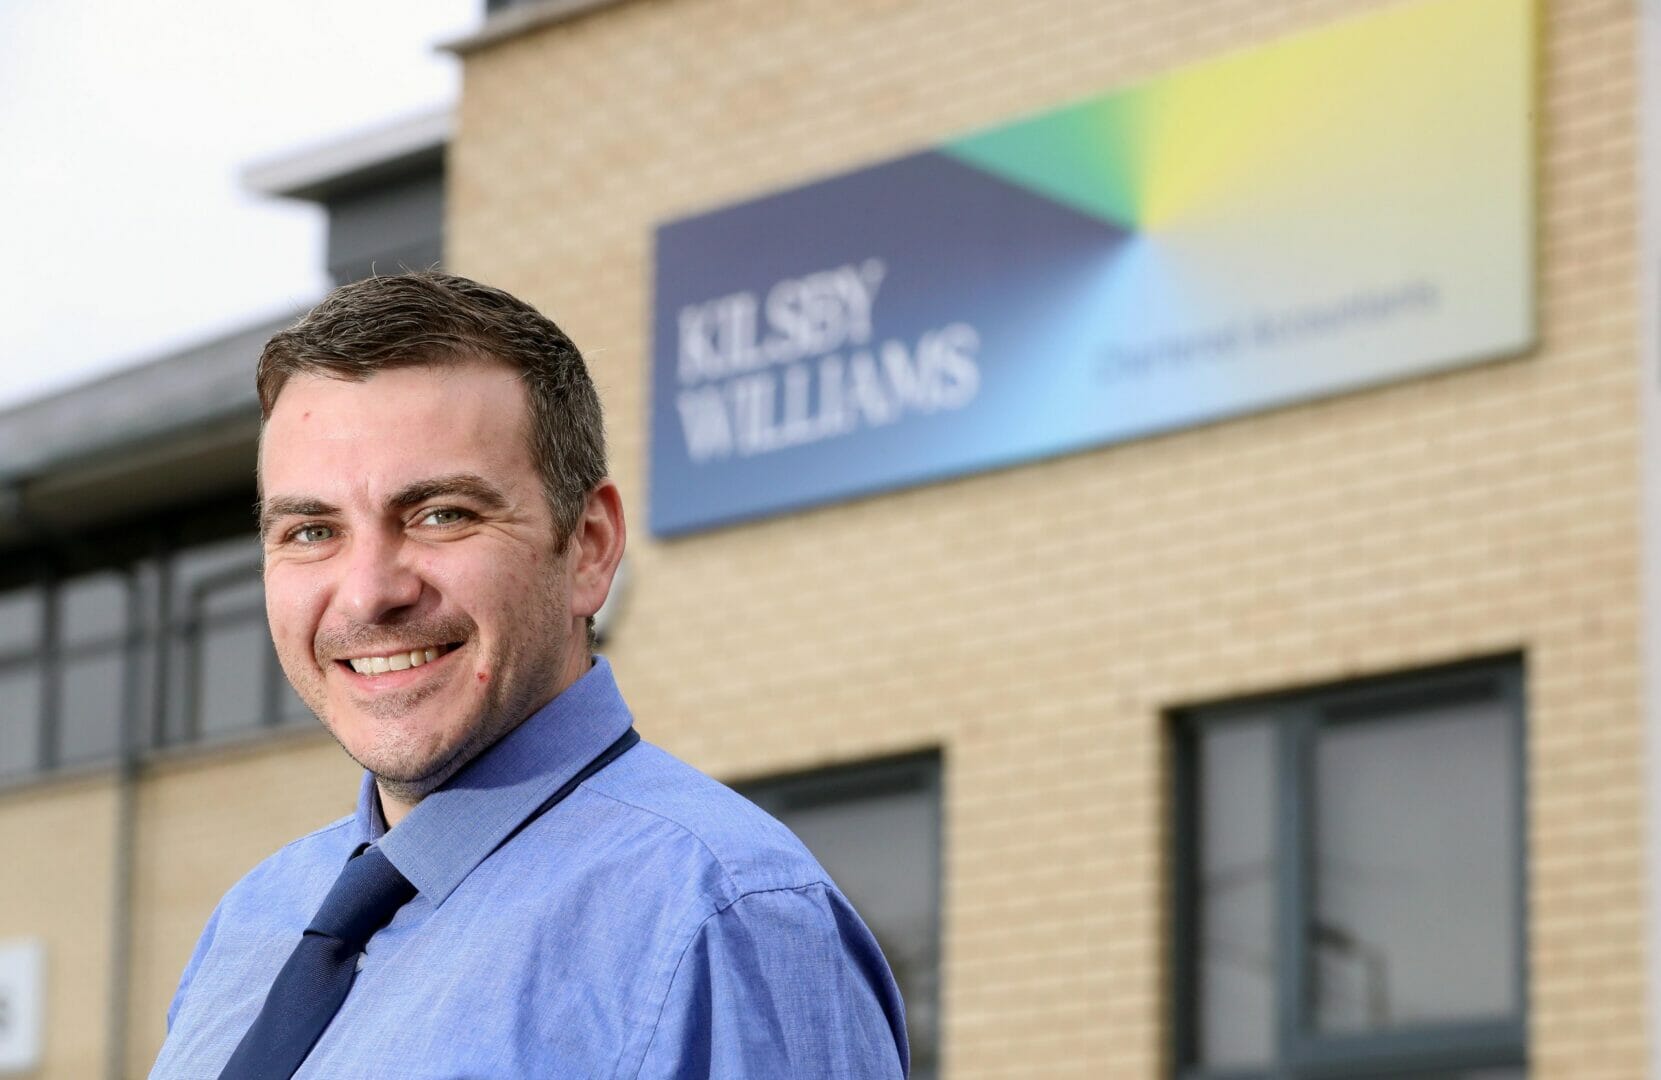 Kilsby Williams urges businesses to prepare for IR35 changes